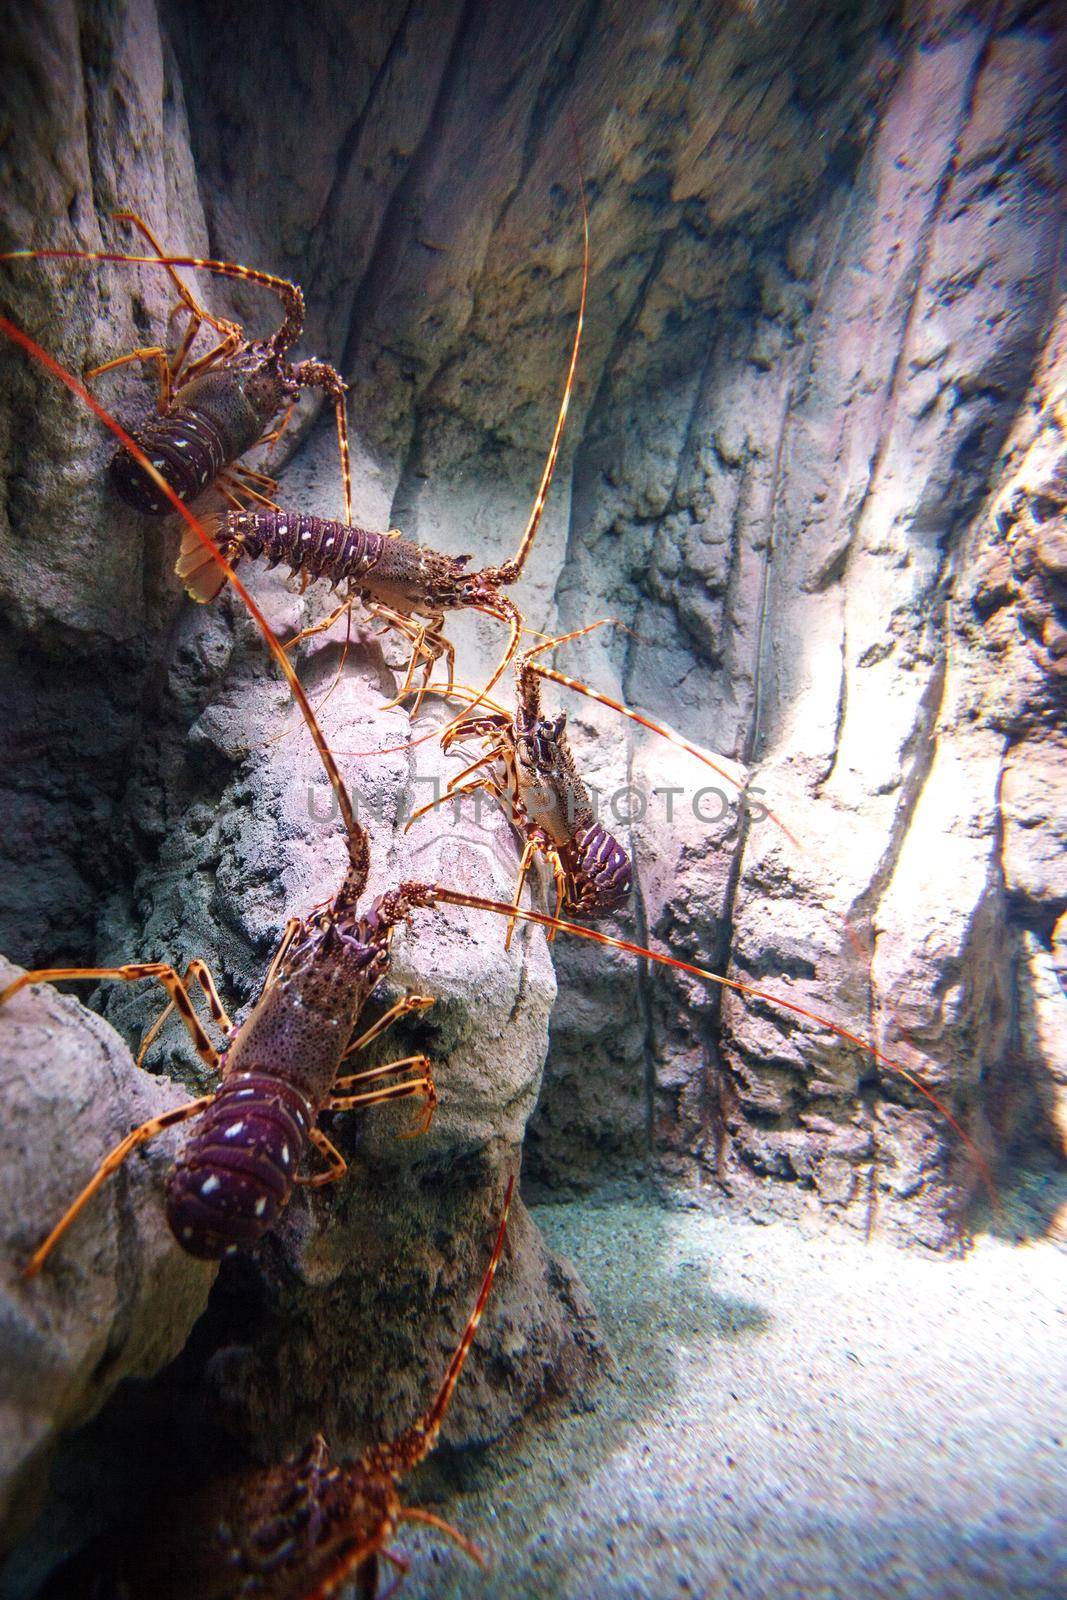 Common spiny lobster (Palinurus elephas) crustaceans underwater on a magenta rock. by Lincikas